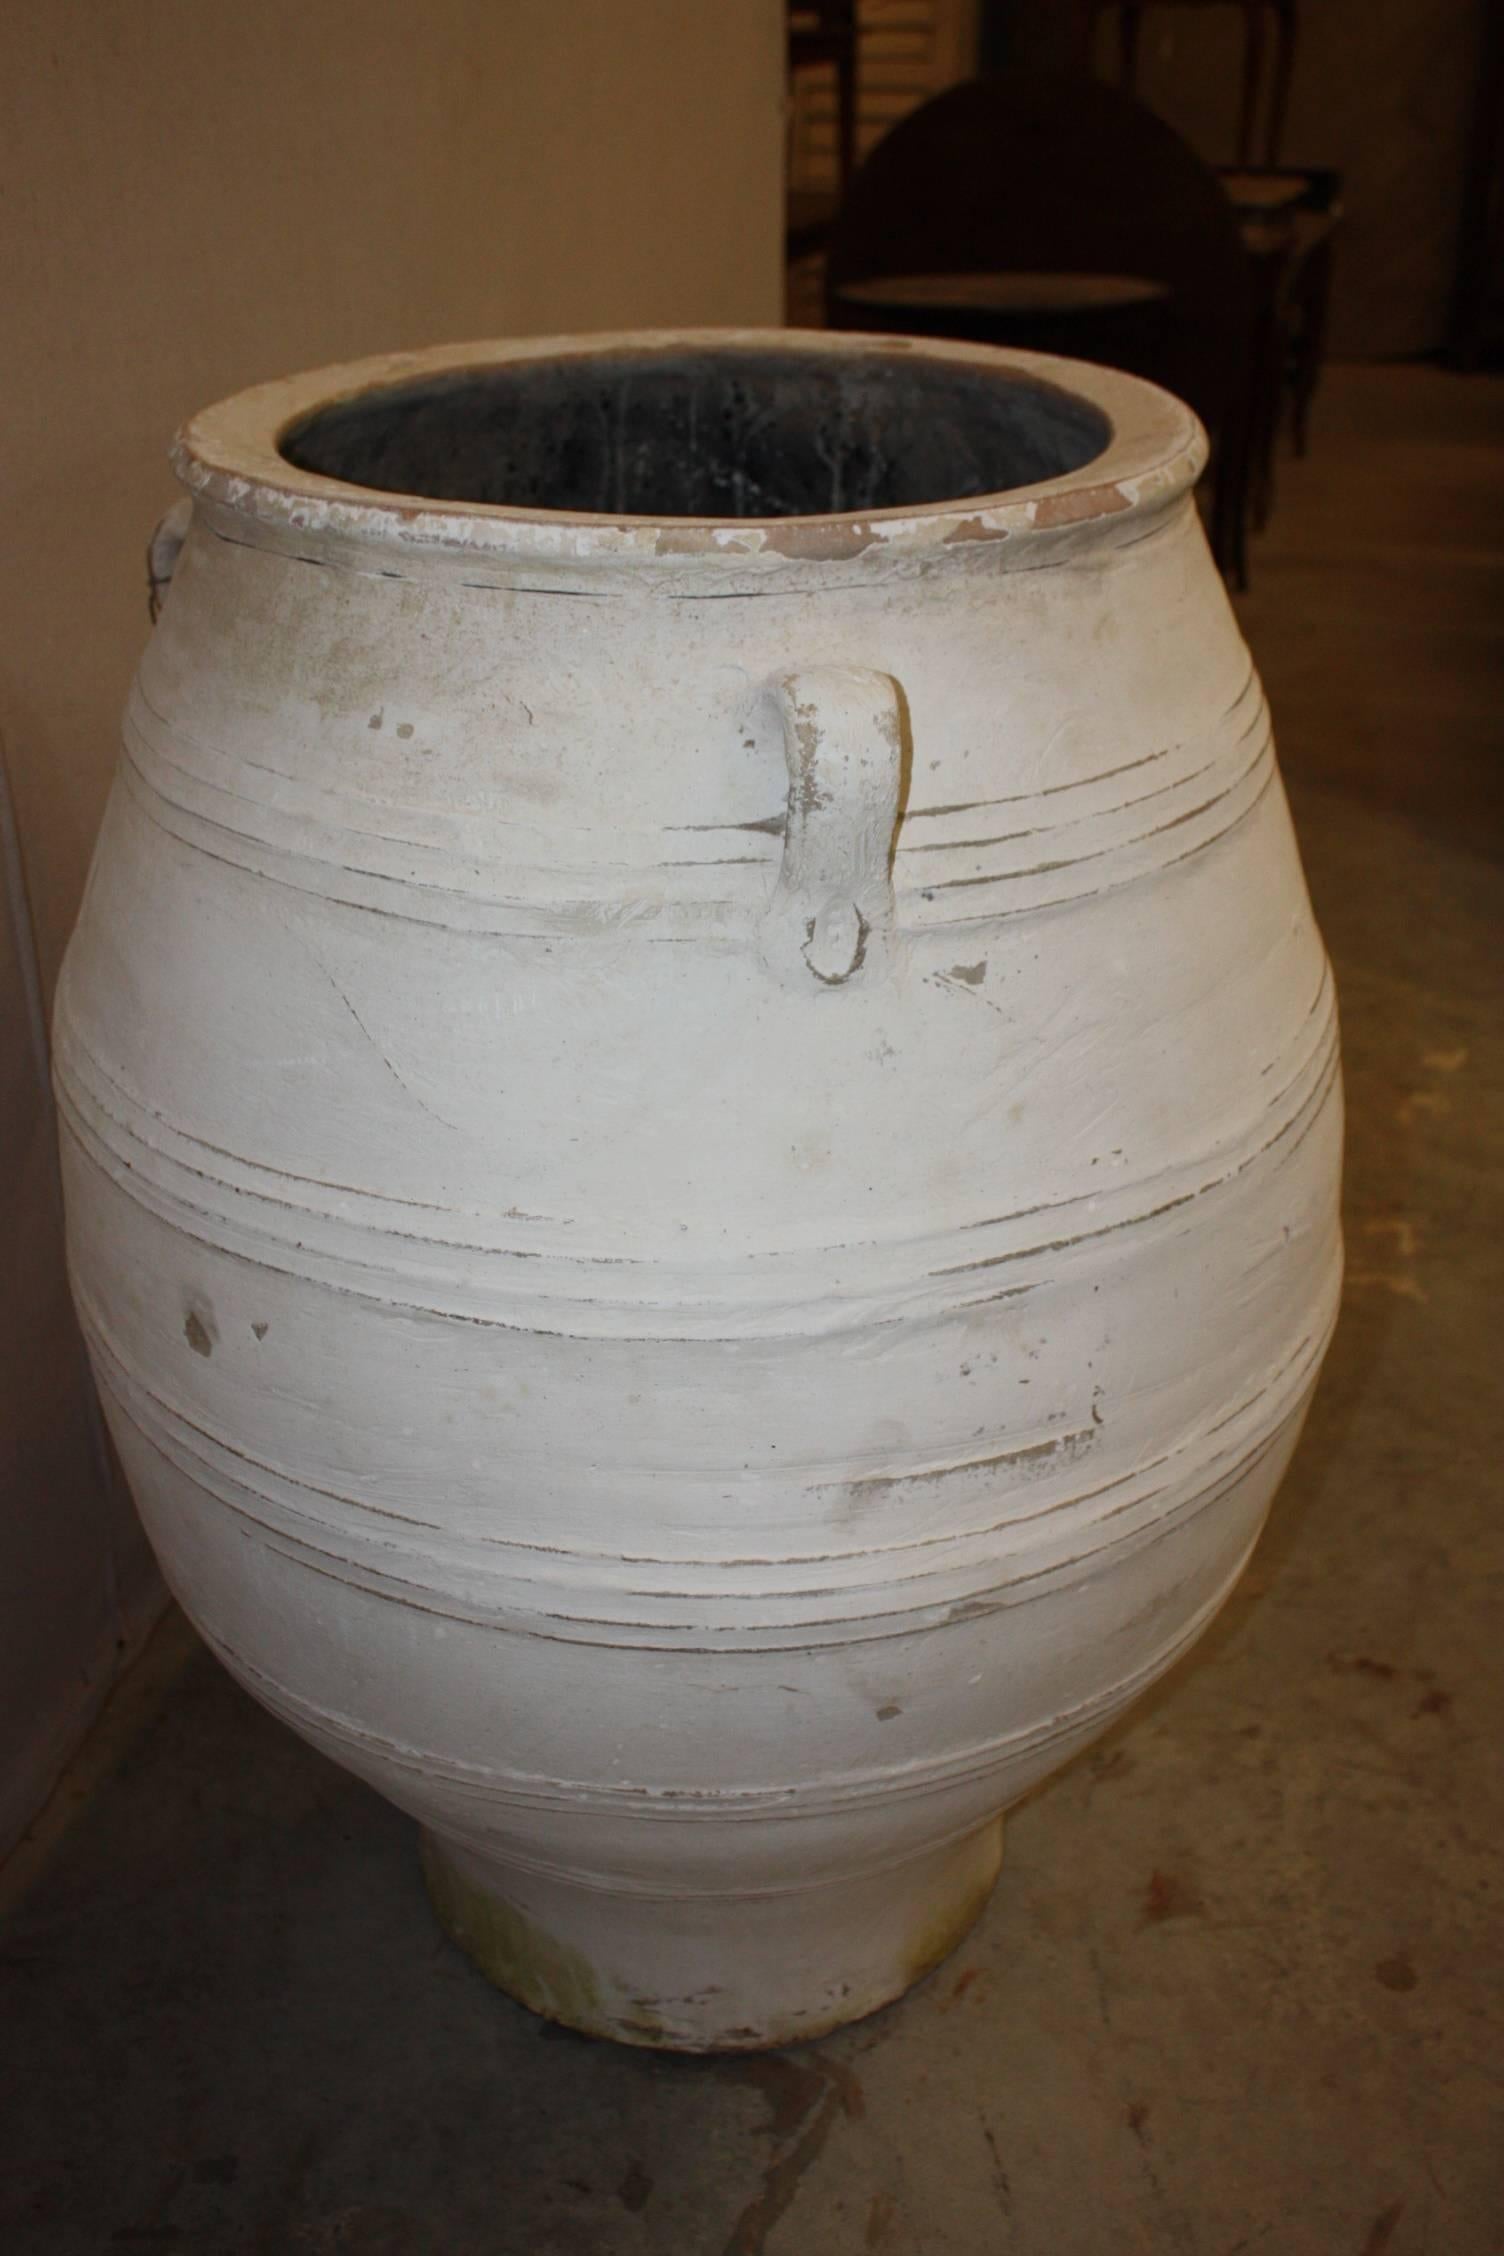 Very large Greek terracotta olive jars with antiqued white paint. We have several in stock in all sizes, shapes and colors. Large olive jars provide a wonderful architectural feature to outdoor gardens and landscape. Also could be used as a planter